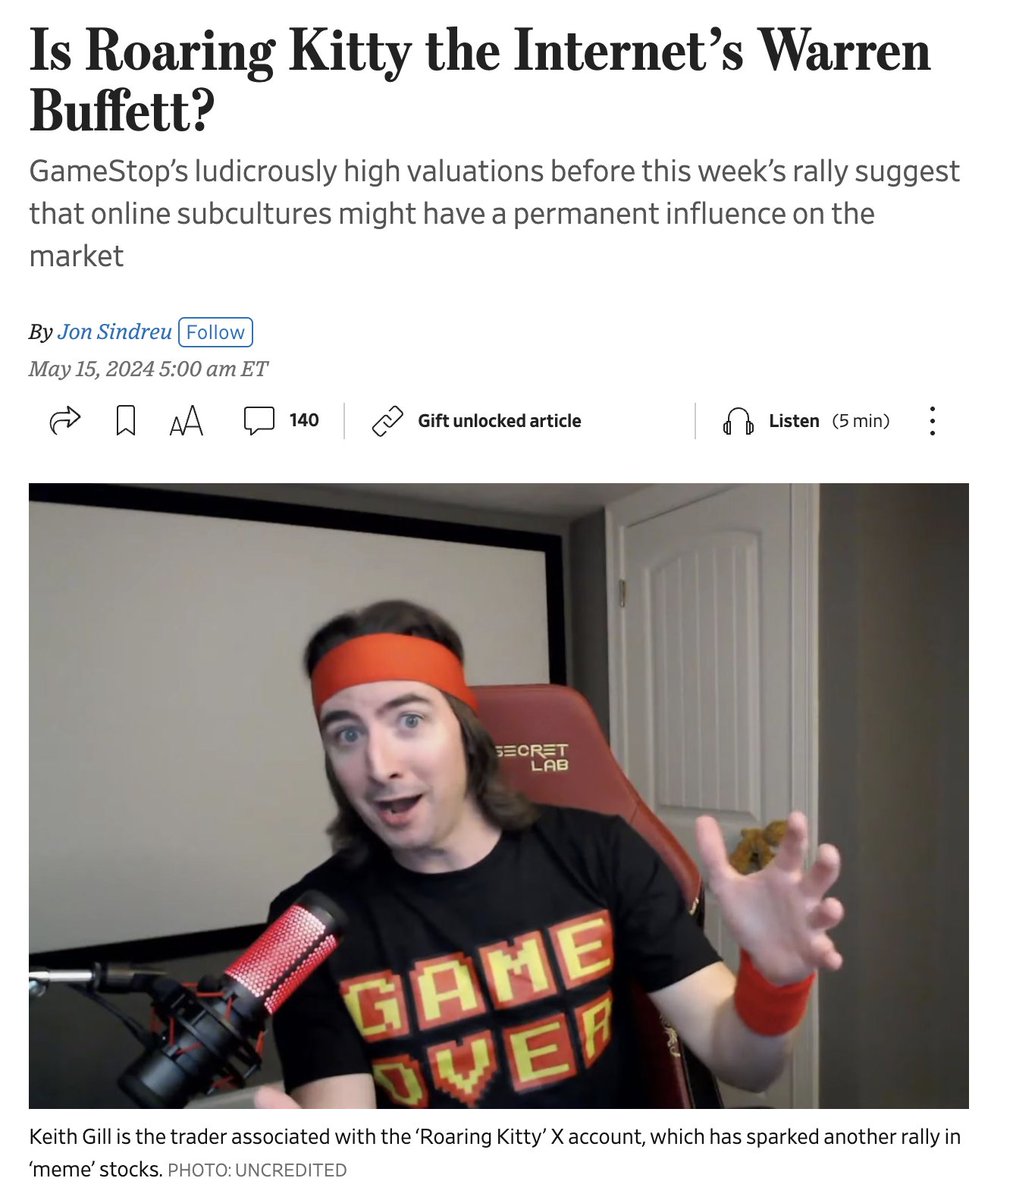 Come on WSJ, don't do this to Buffett 😂